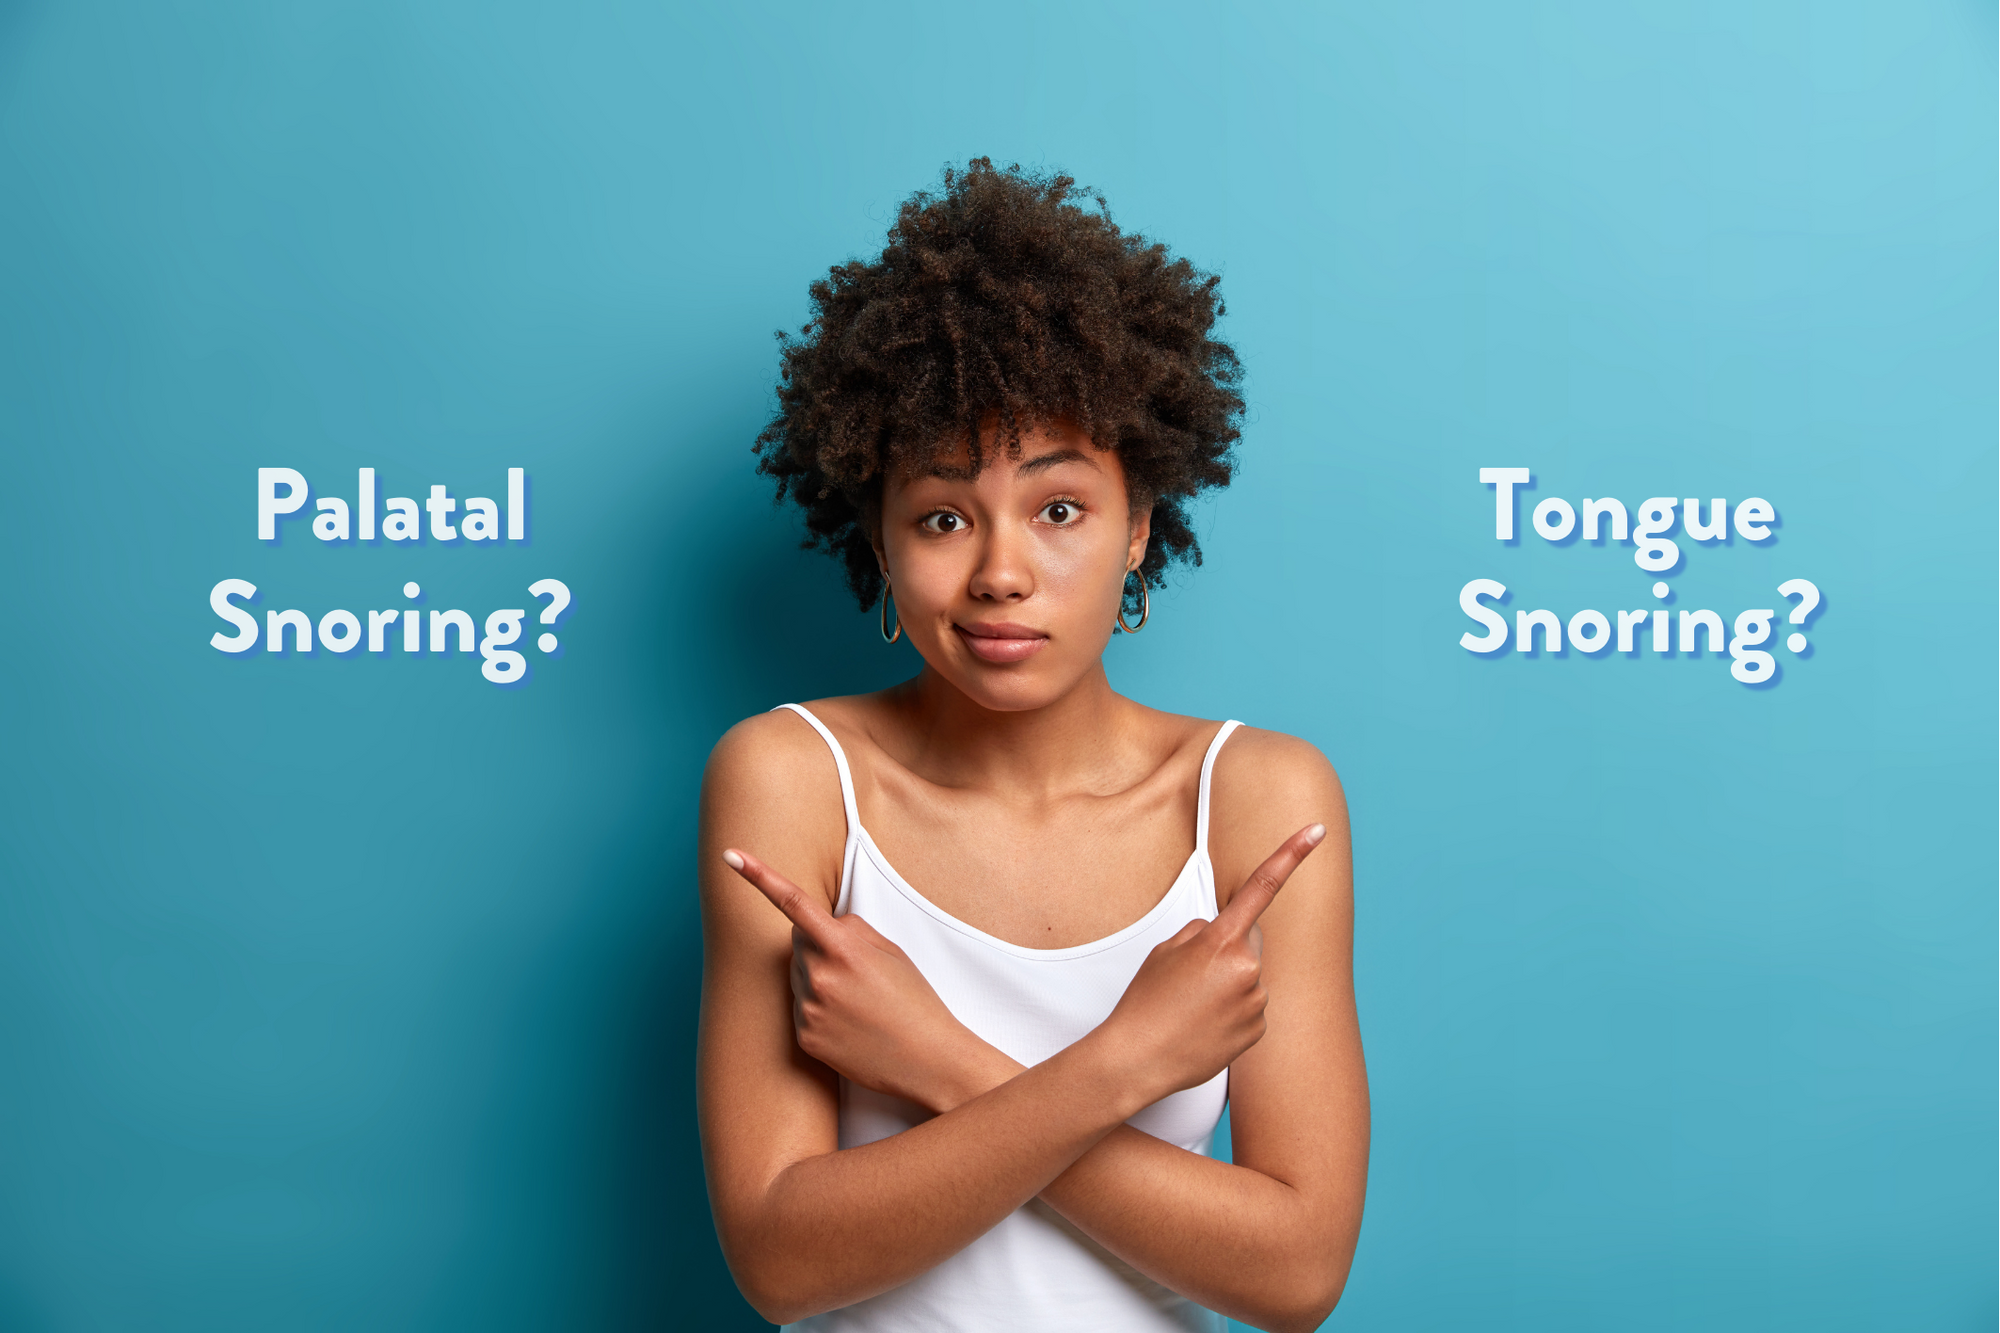 Woman not sure about palatal snoring, or is it tongue snoring?